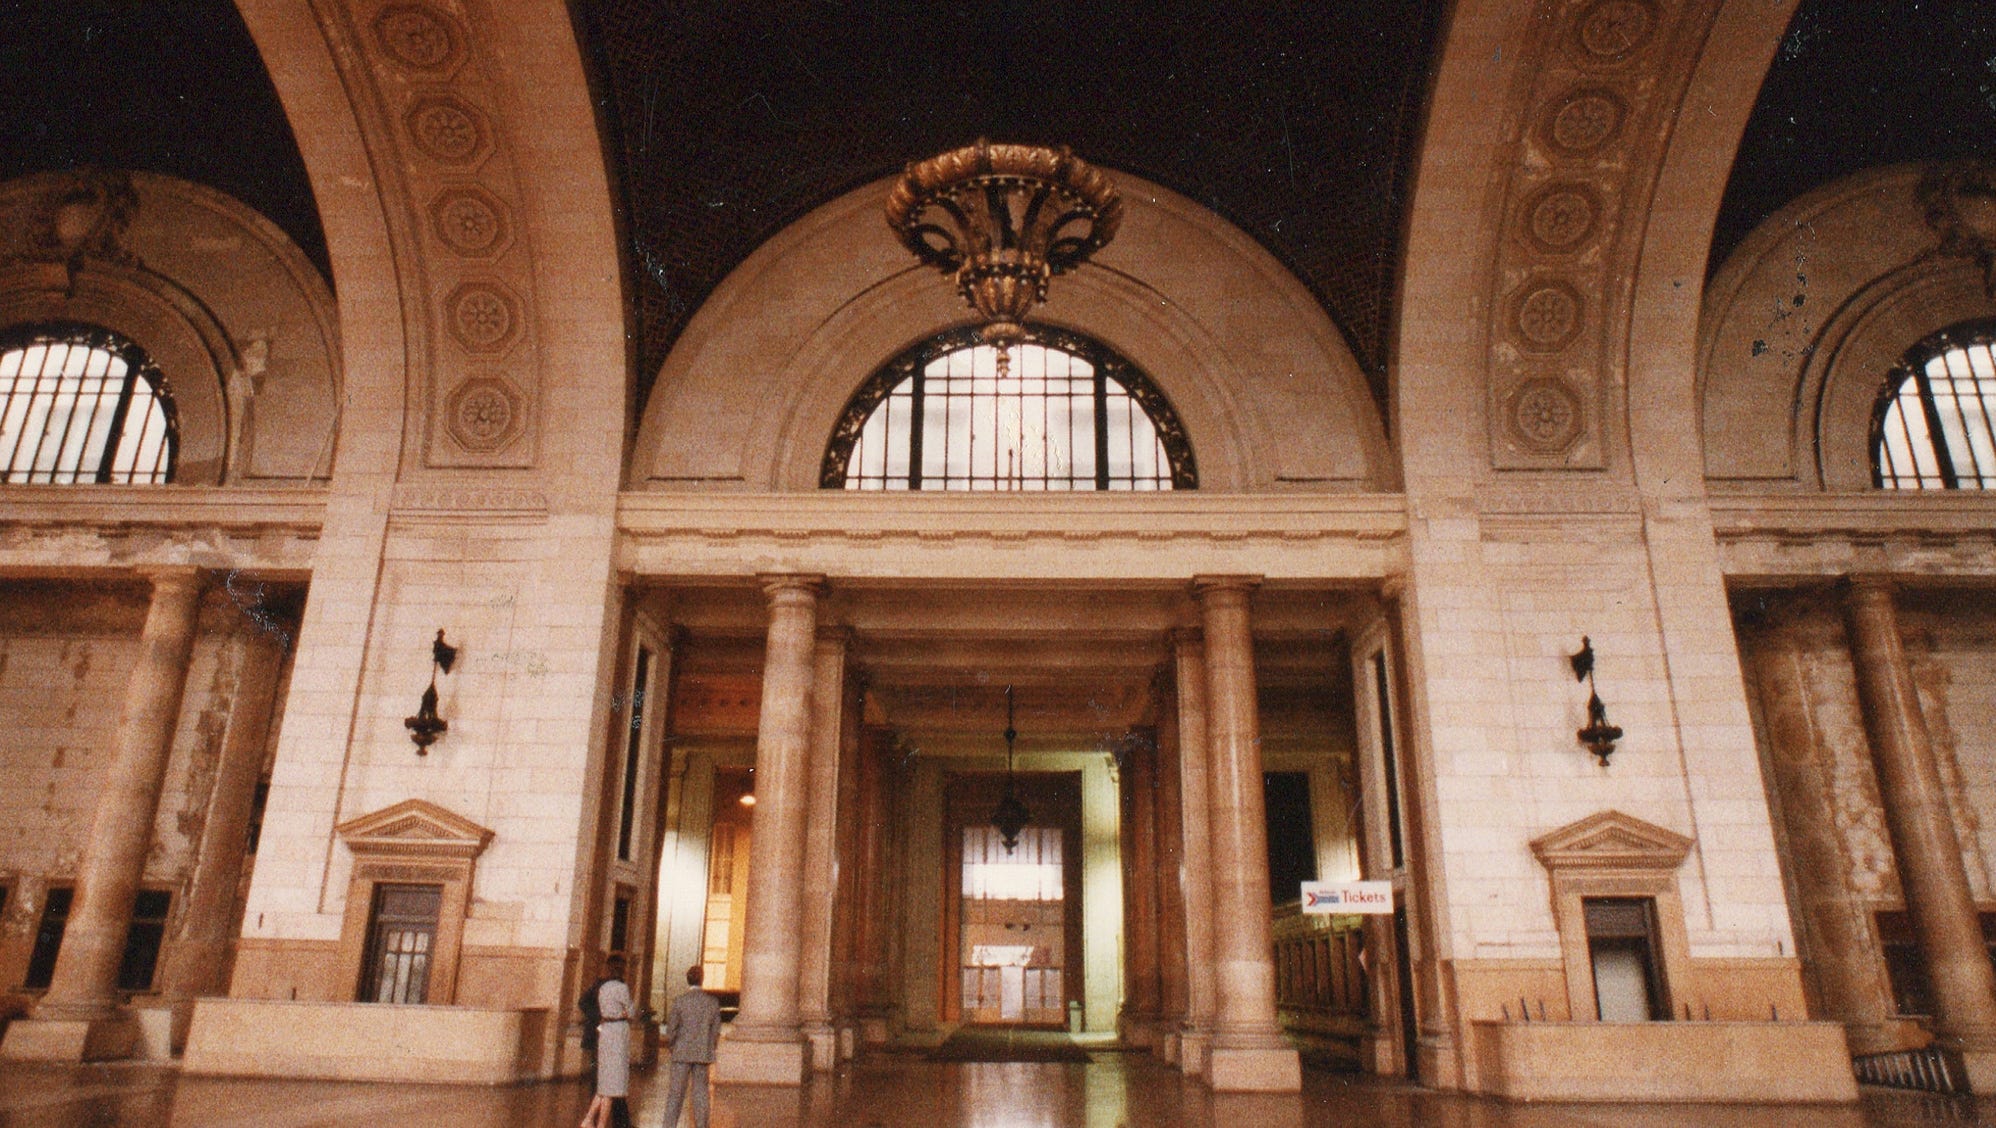 While closed, the station is still intact in October 1989.